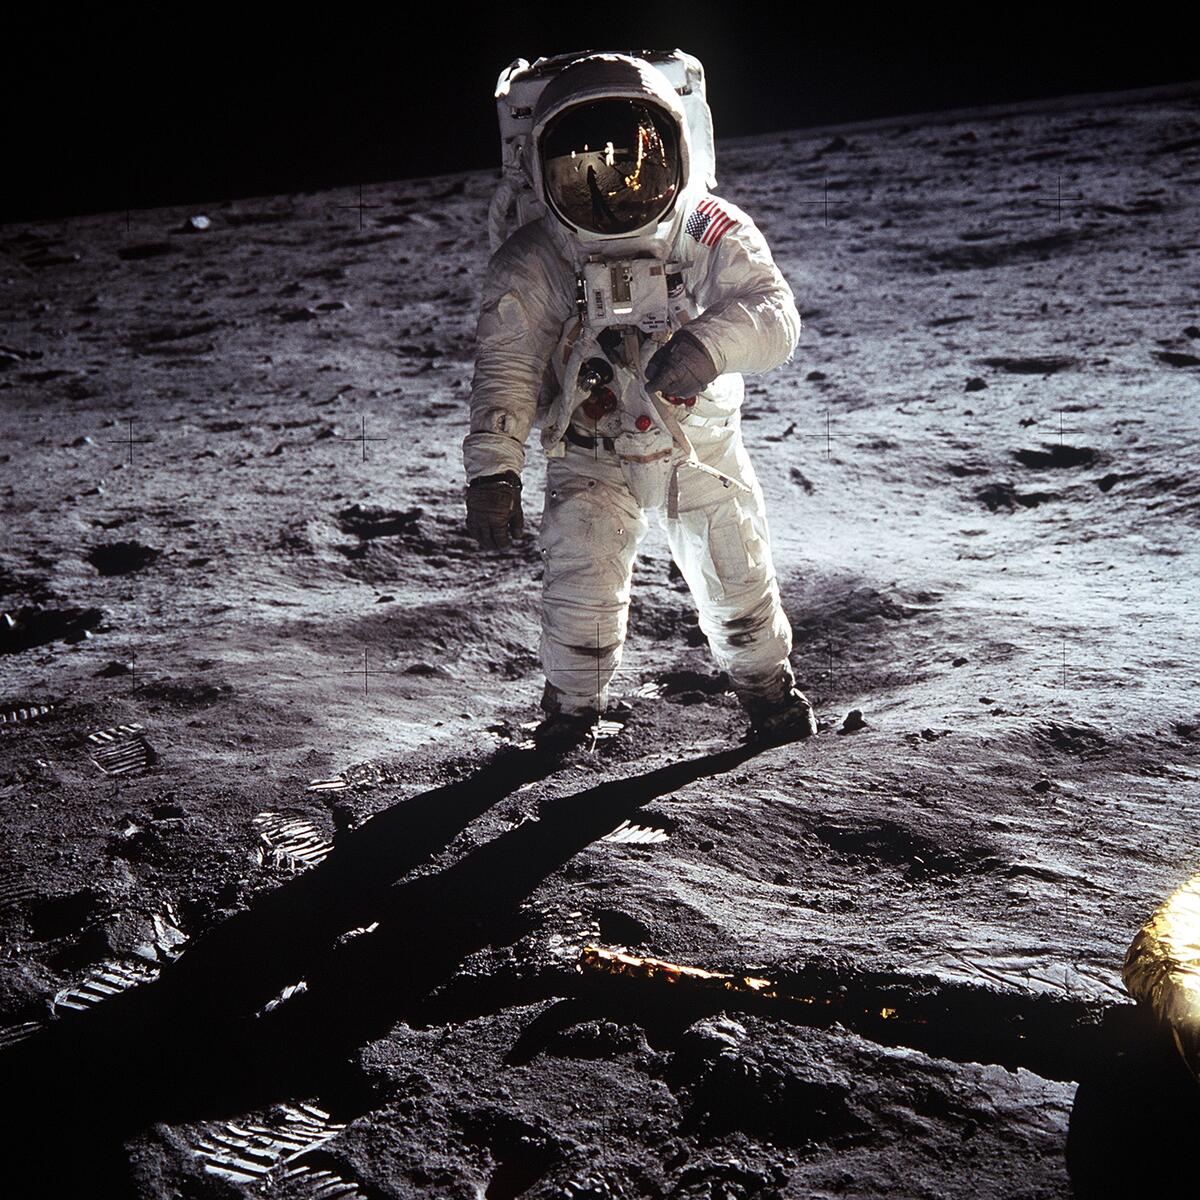 An astronaut standing on the surface of the moon